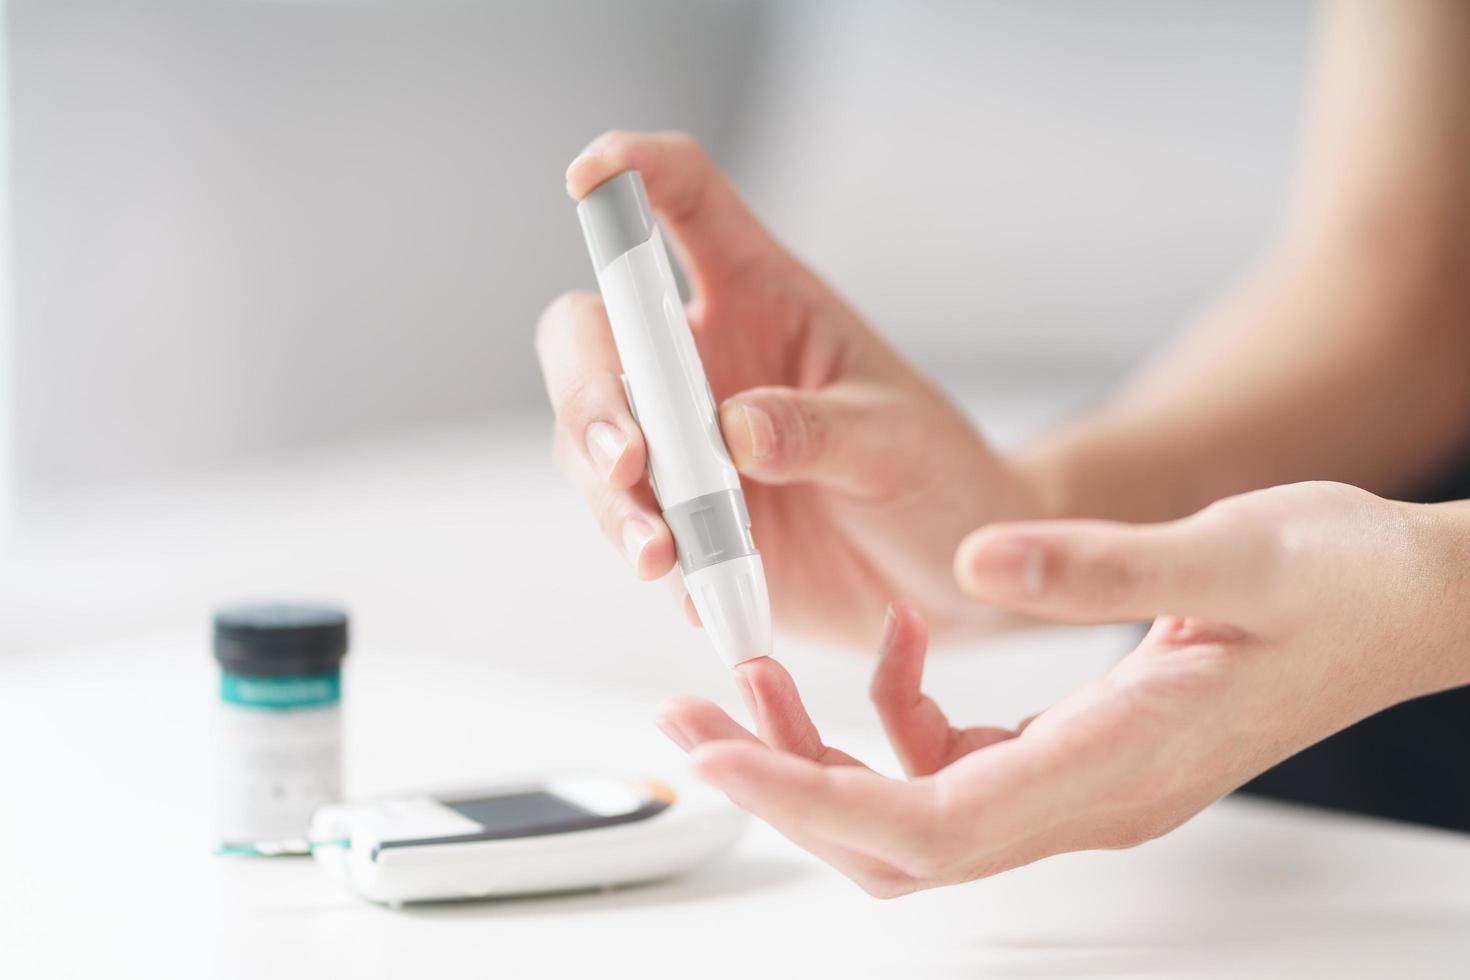 Asian woman using lancet on finger for checking blood sugar level by Glucose meter, Healthcare and Medical, diabetes, glycemia concept photo